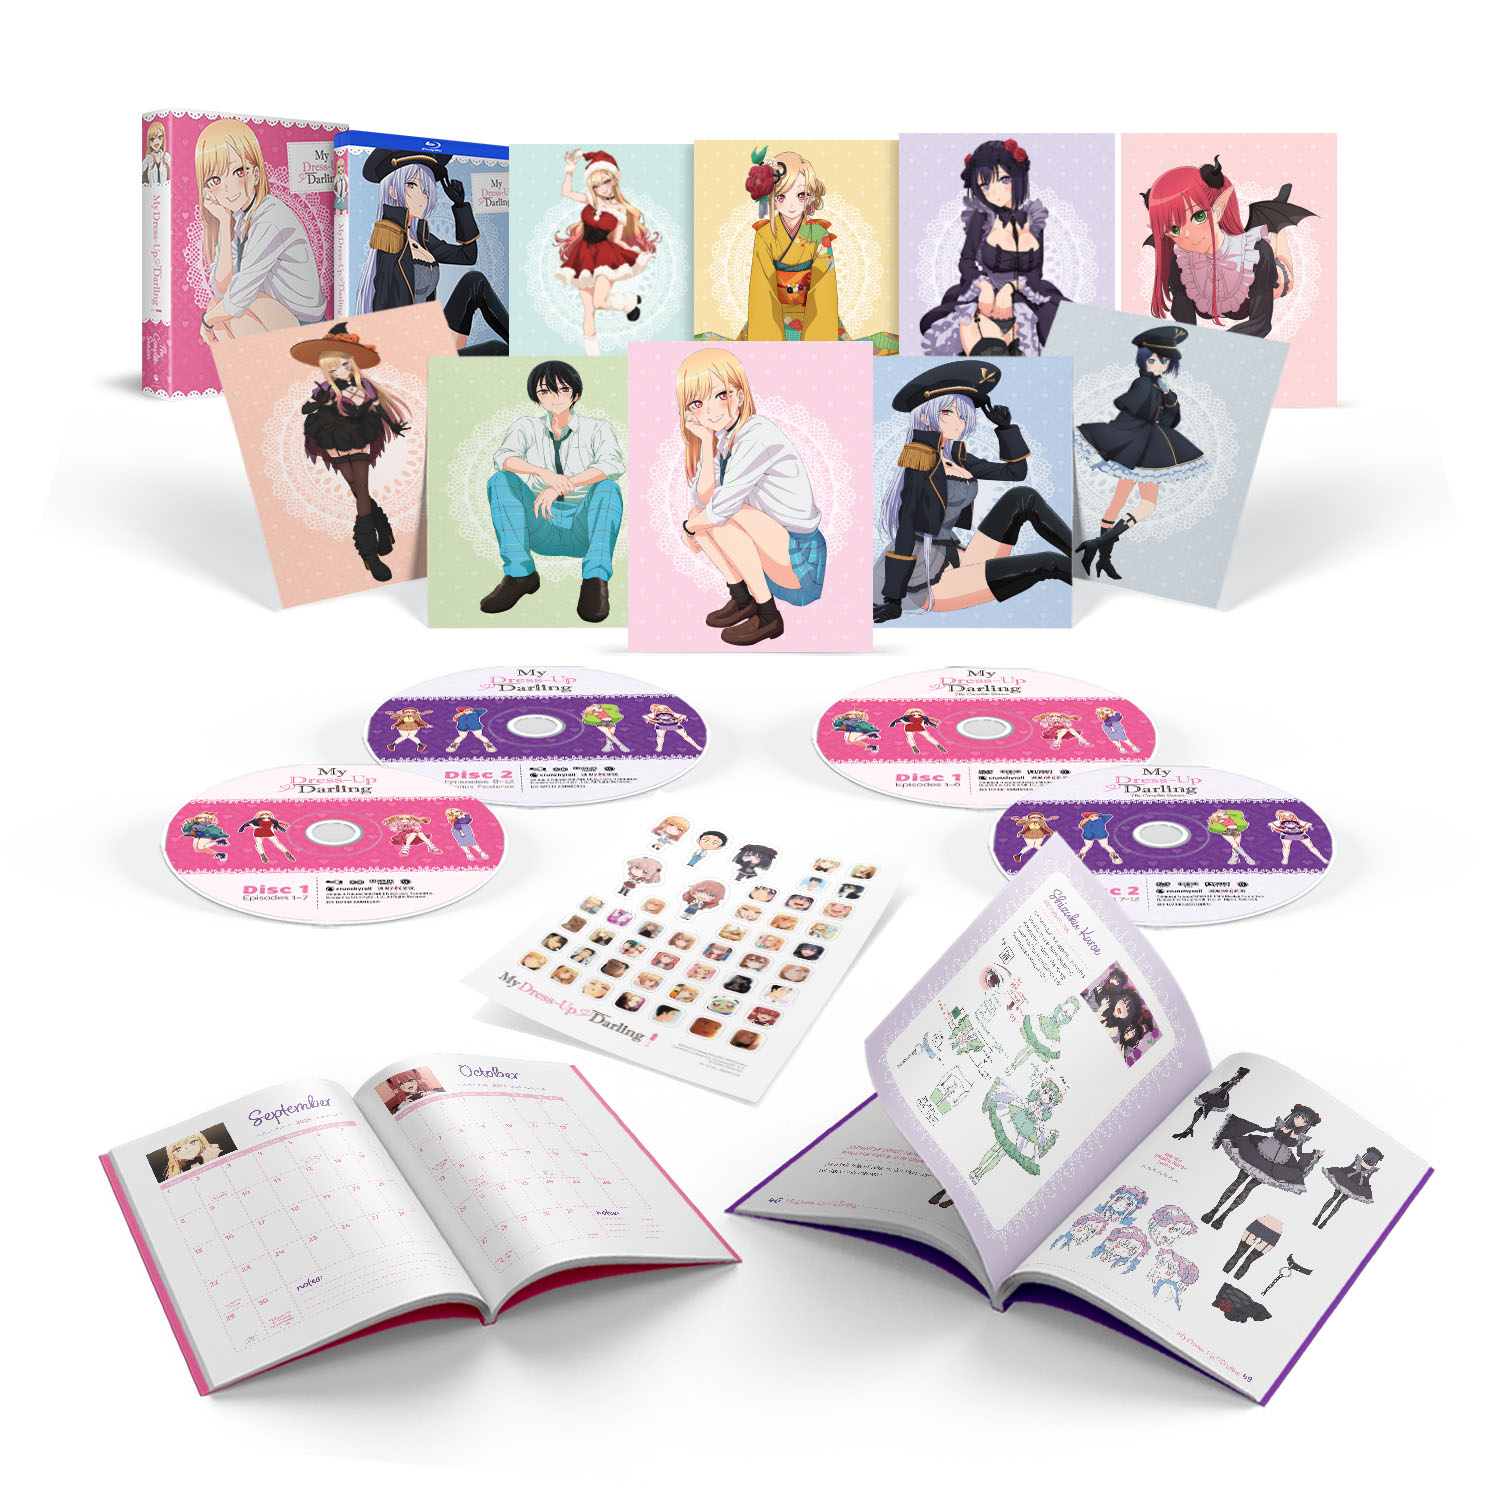 My Dress-Up Darling Vol.1-12 Set- Official Japanese Edition